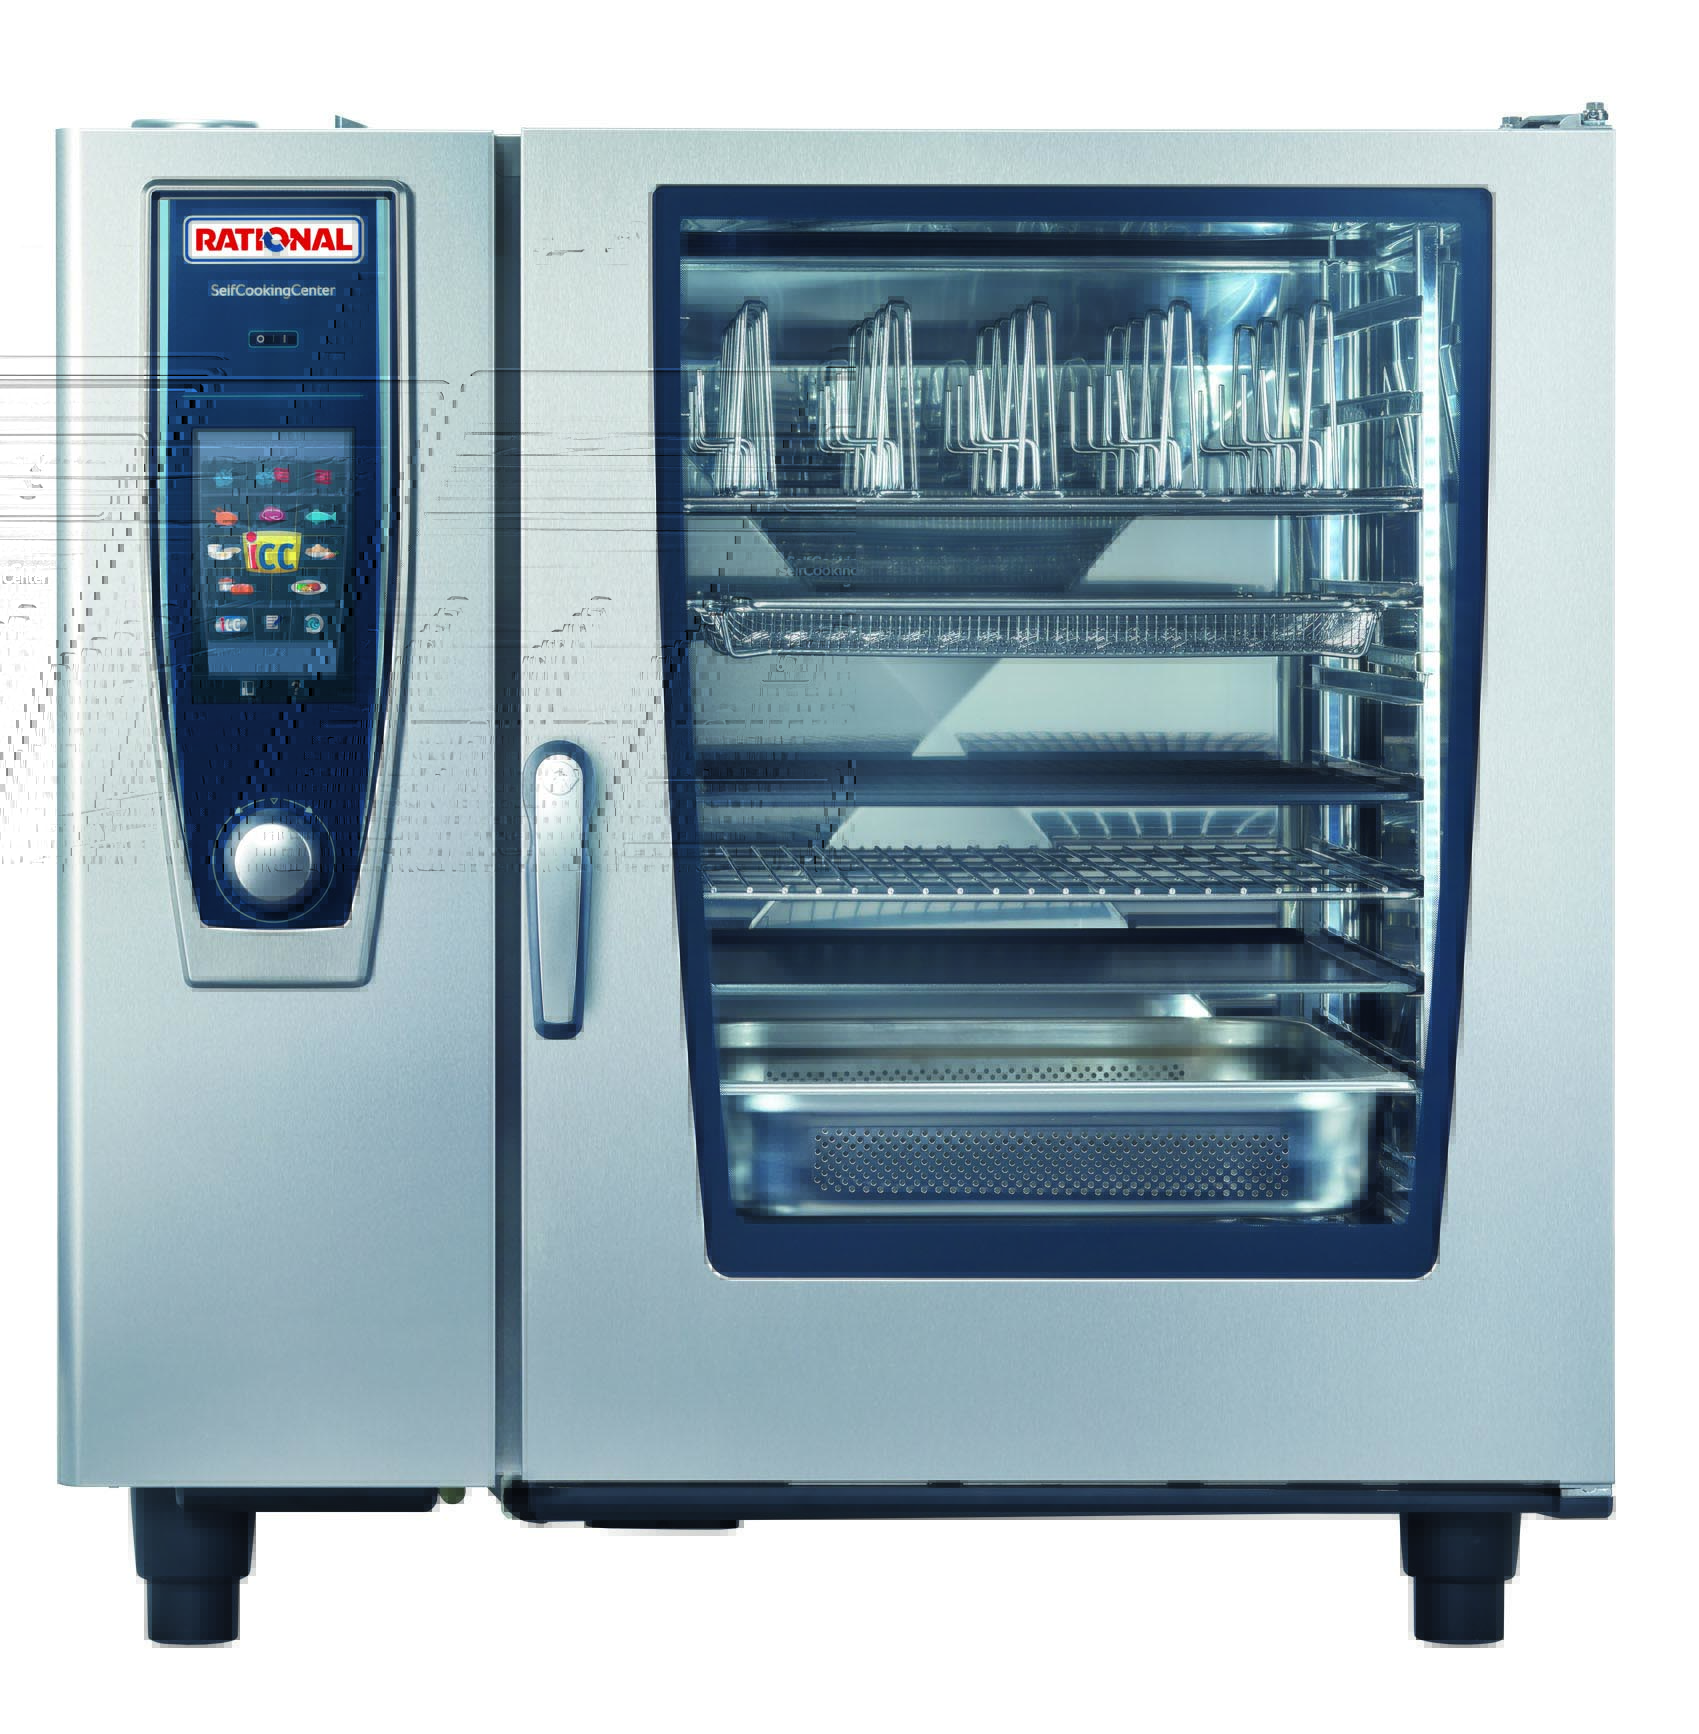 Electric ovens with steam фото 84